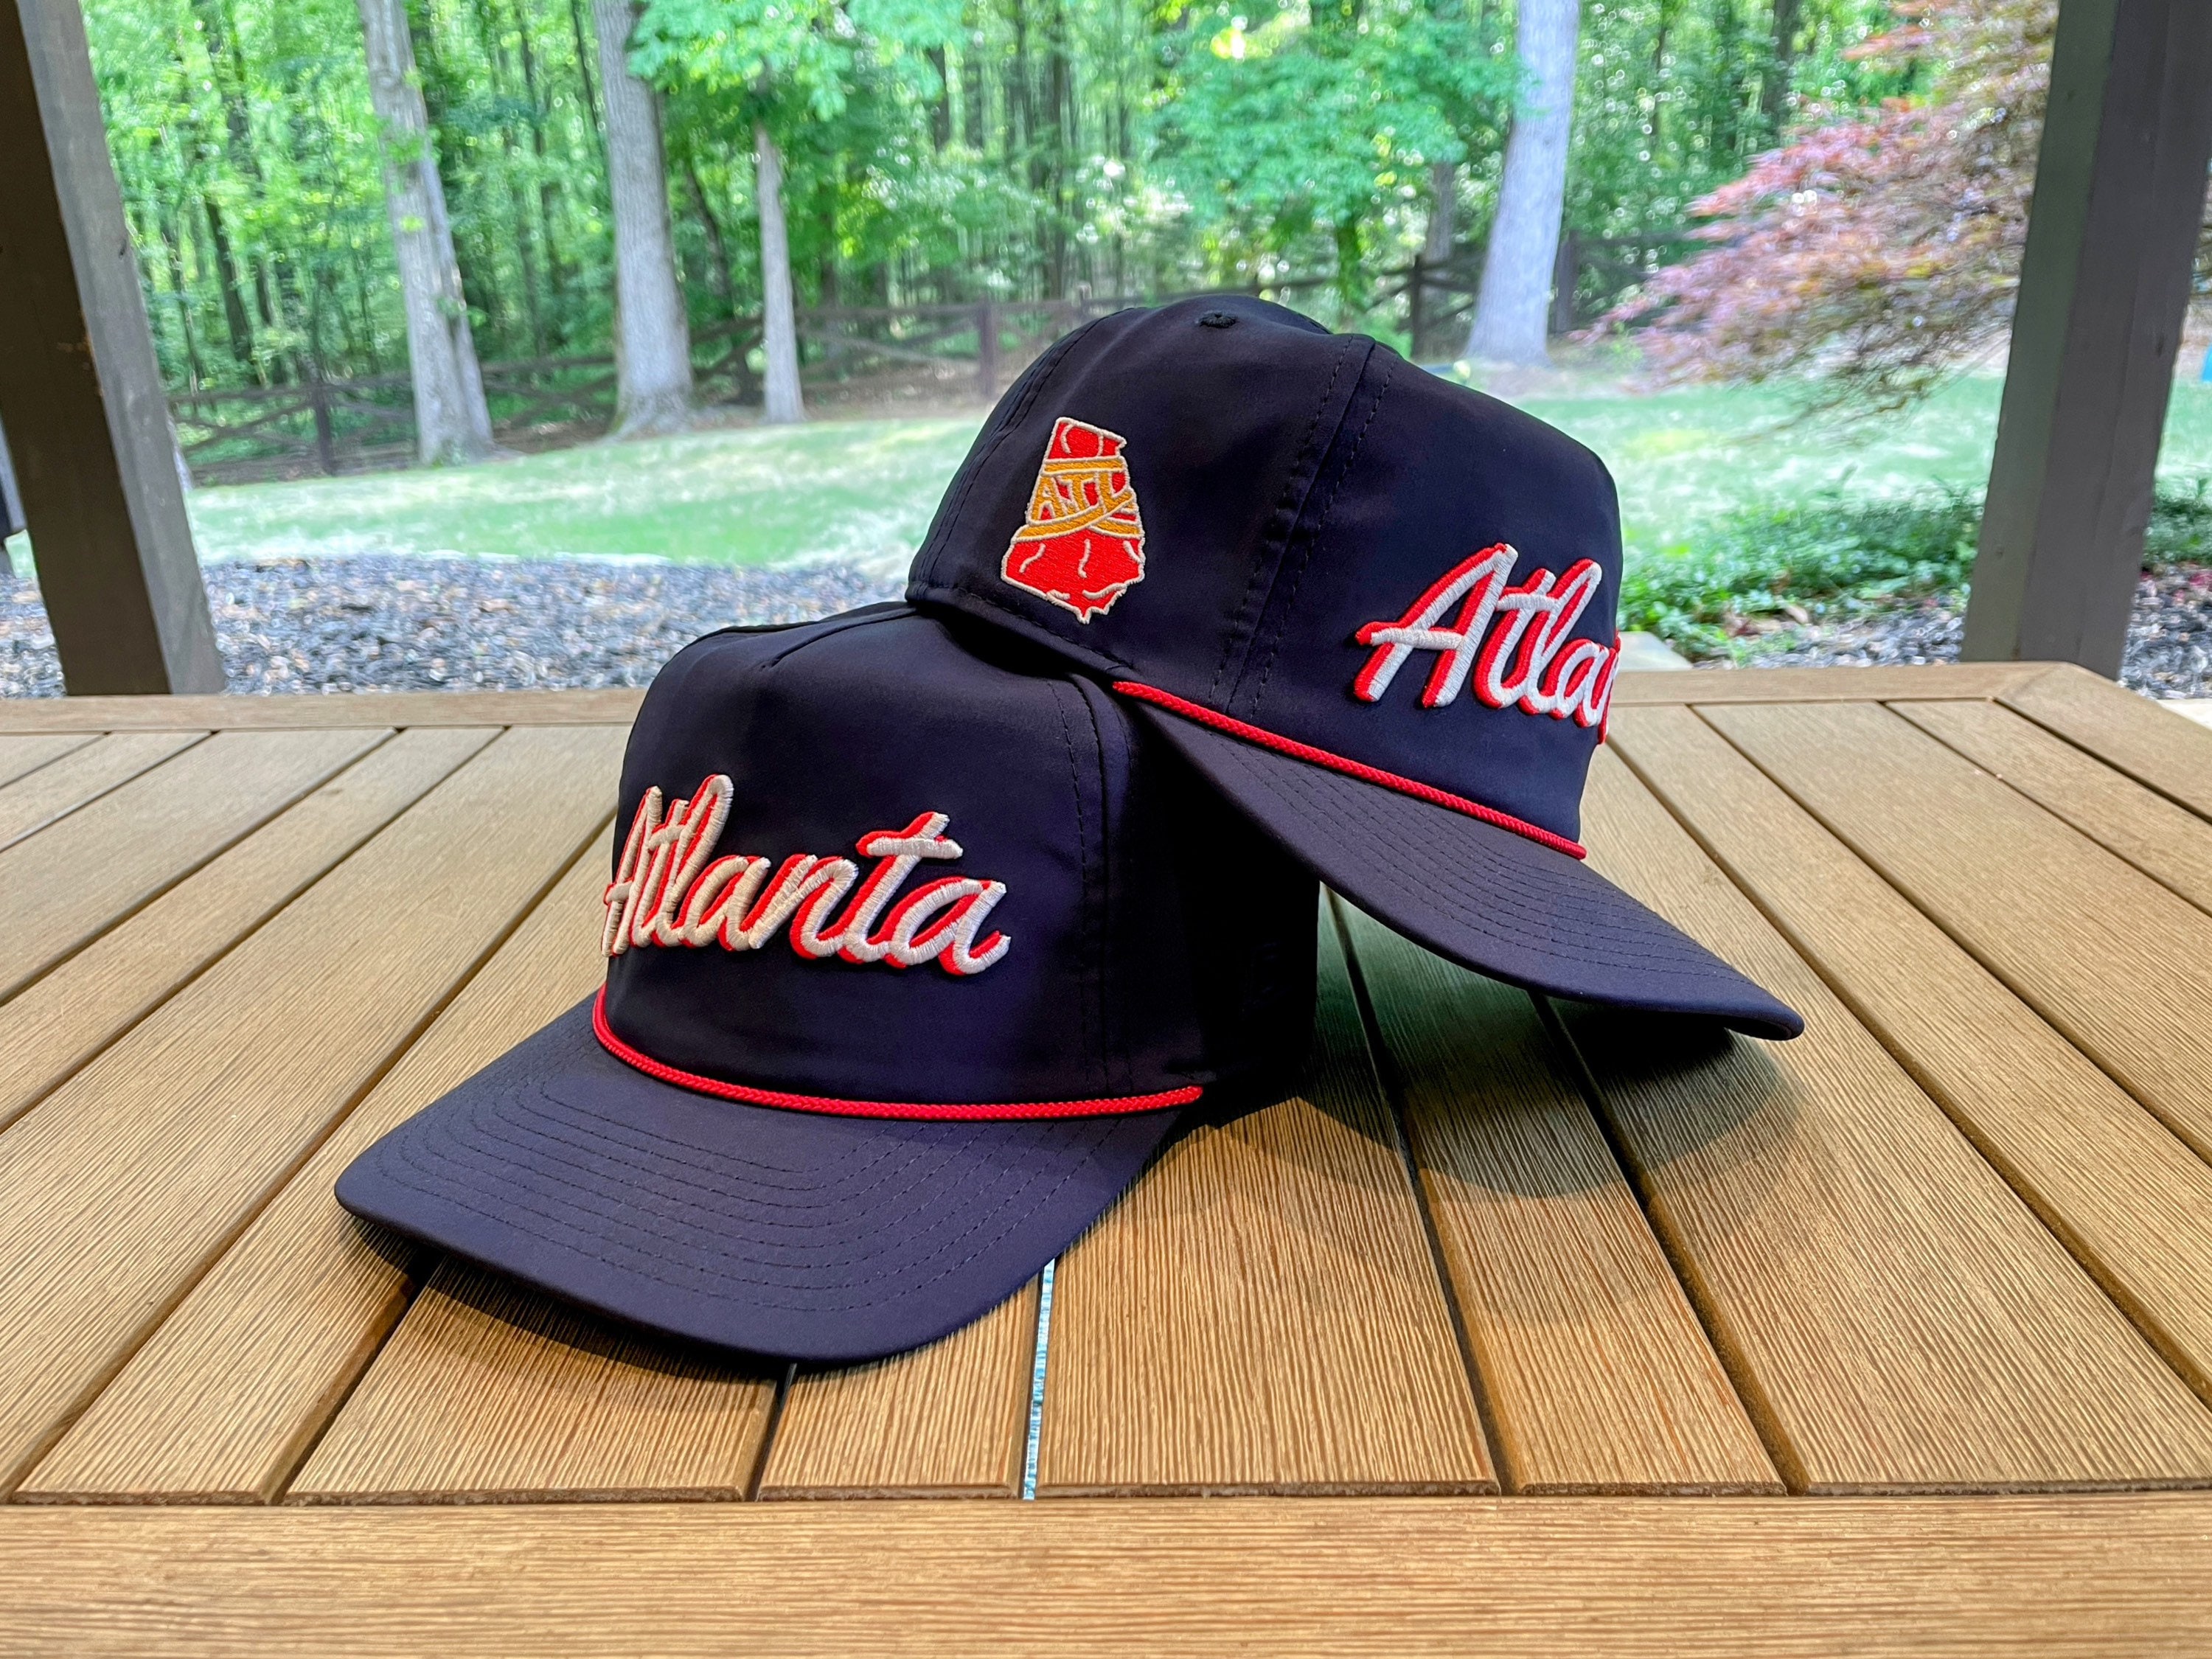 Navy atlanta Rope Hat Baseball Trucker Hat Tomahawk Chop 3D Embroidered  Golf ATL Cap Father's Day 